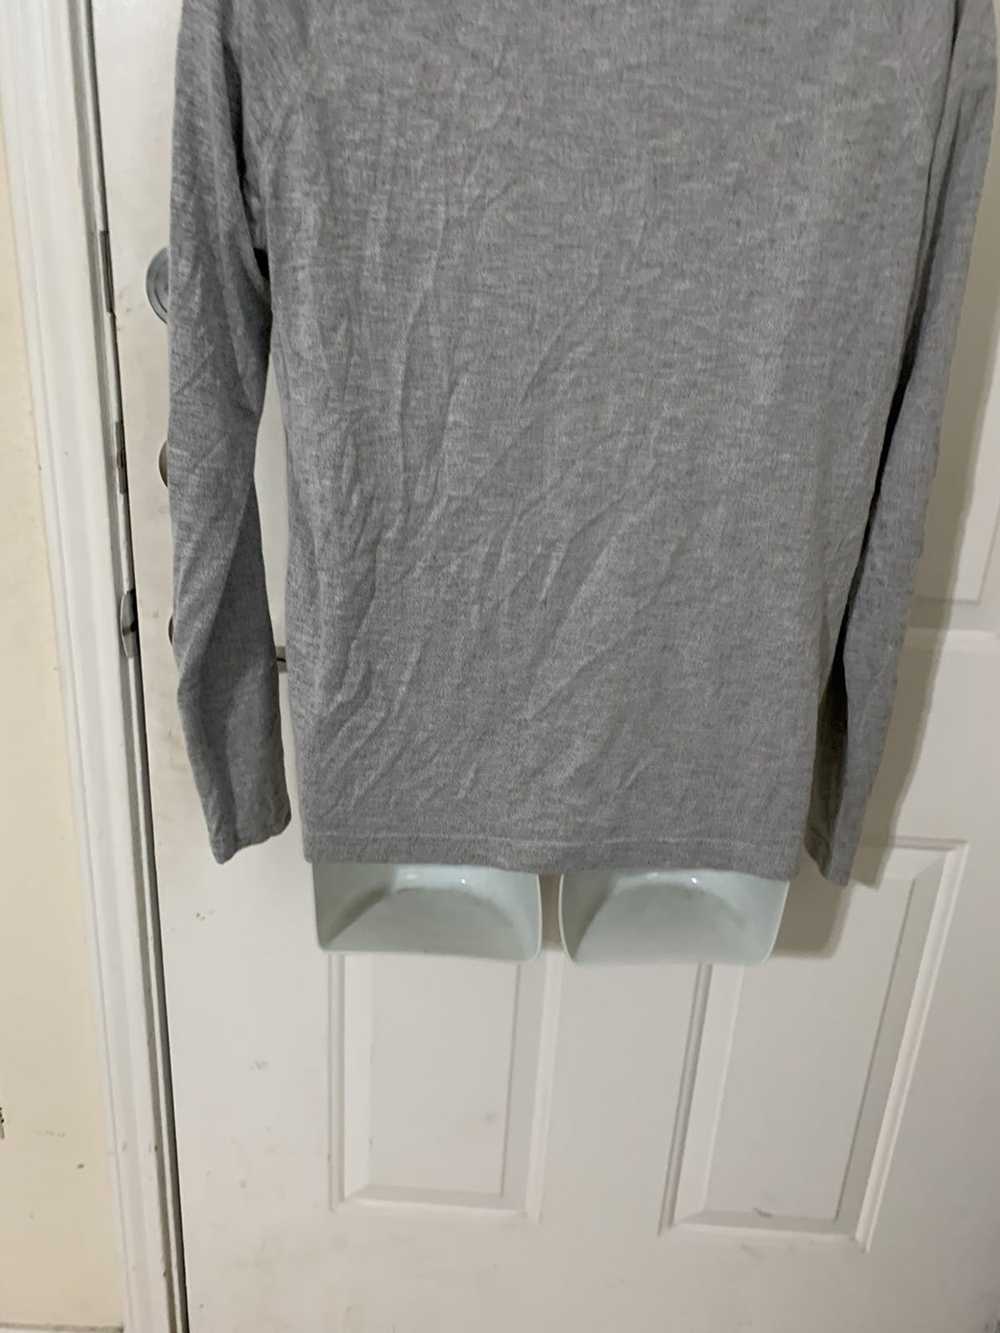 Theory LS Henley t shirt - image 6